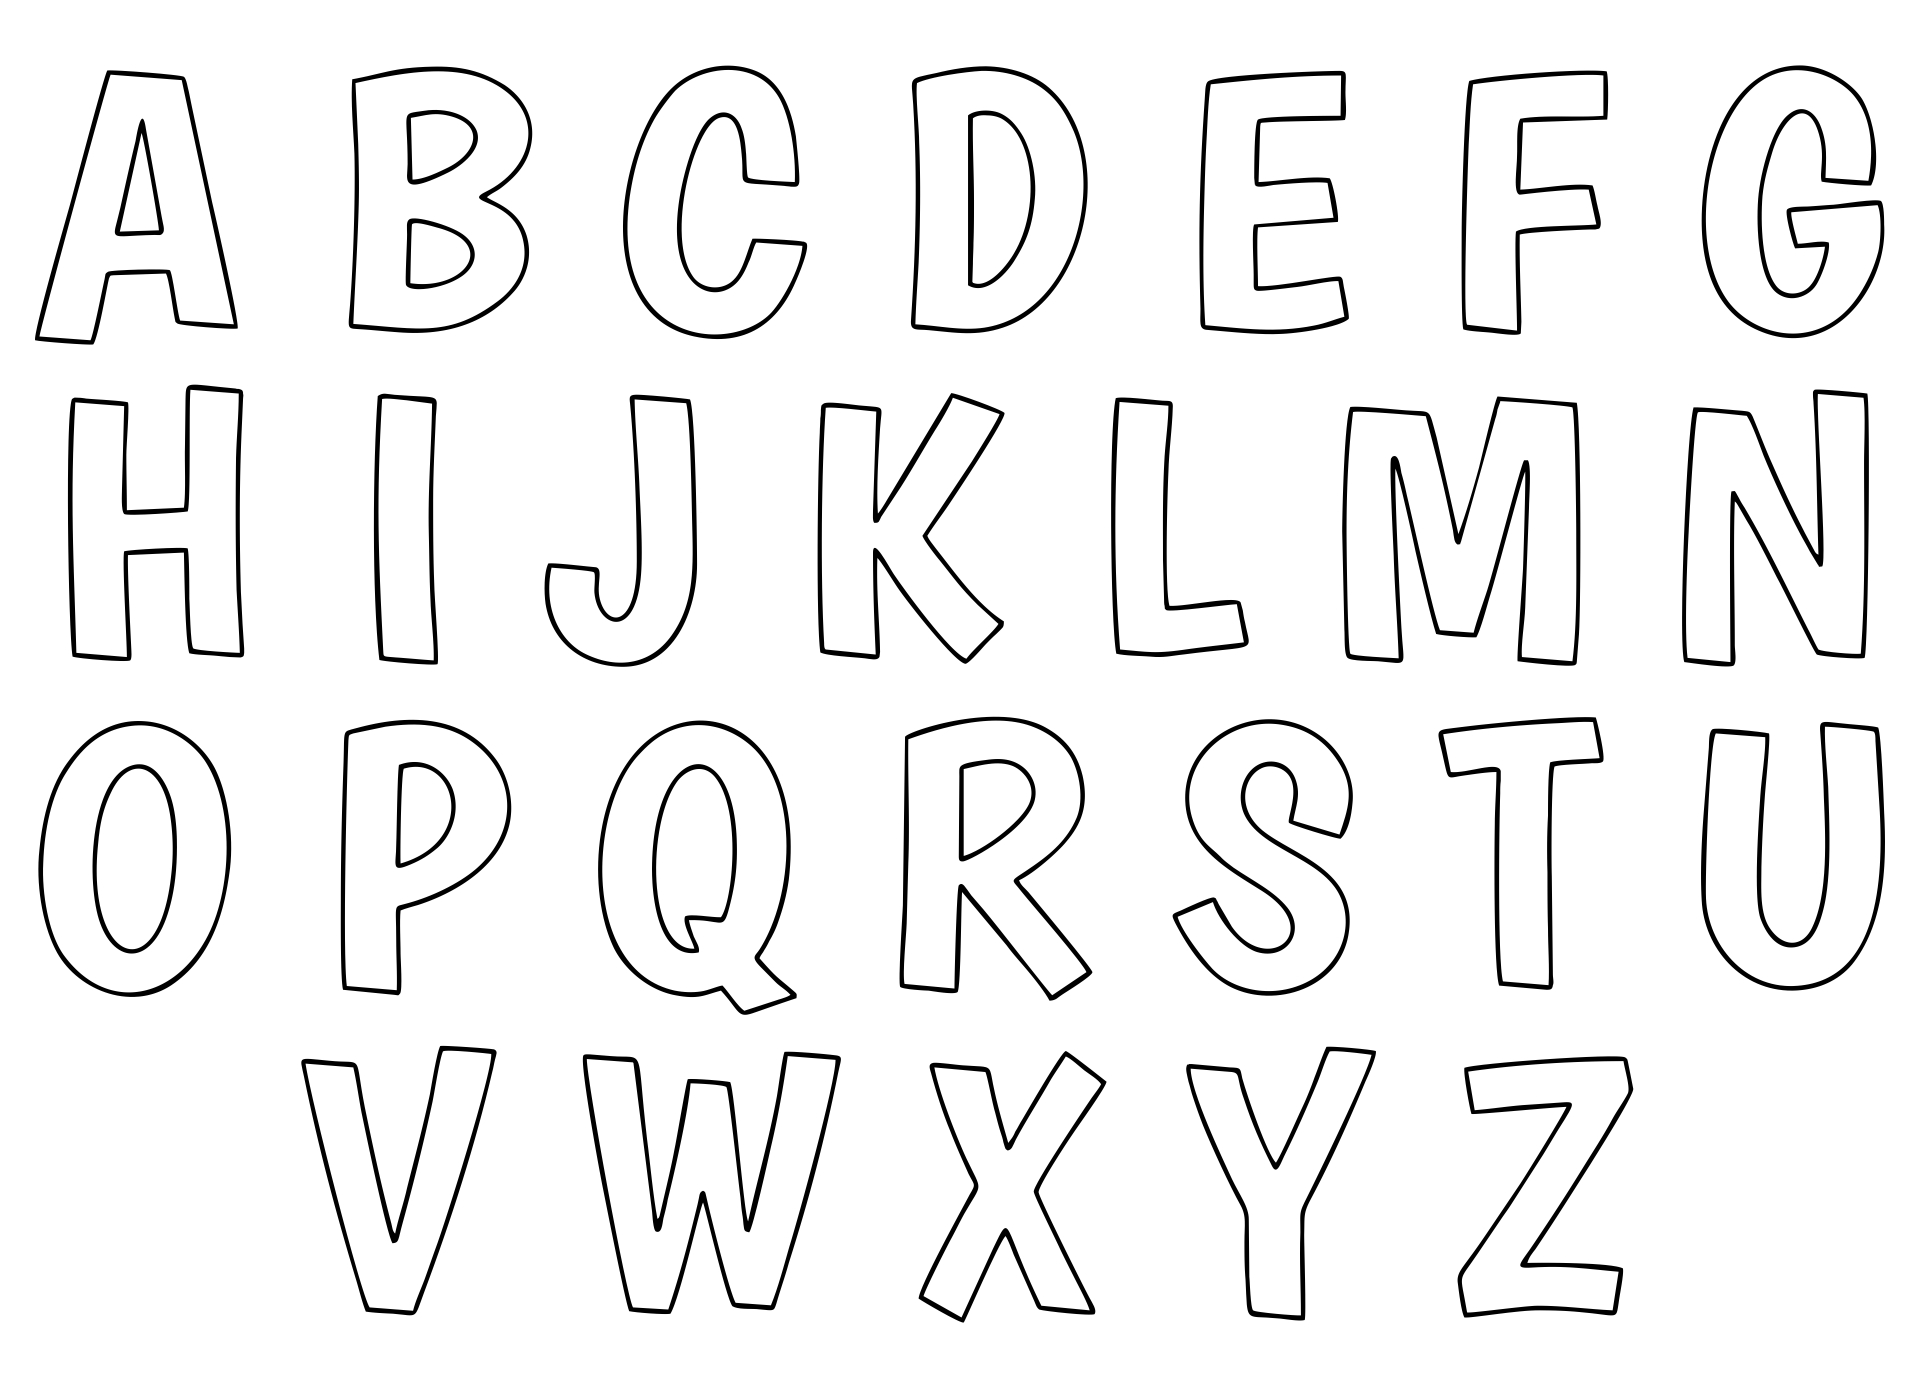 Have You Heard? Free Alphabet Block Letters To Print Is Your Best Bet